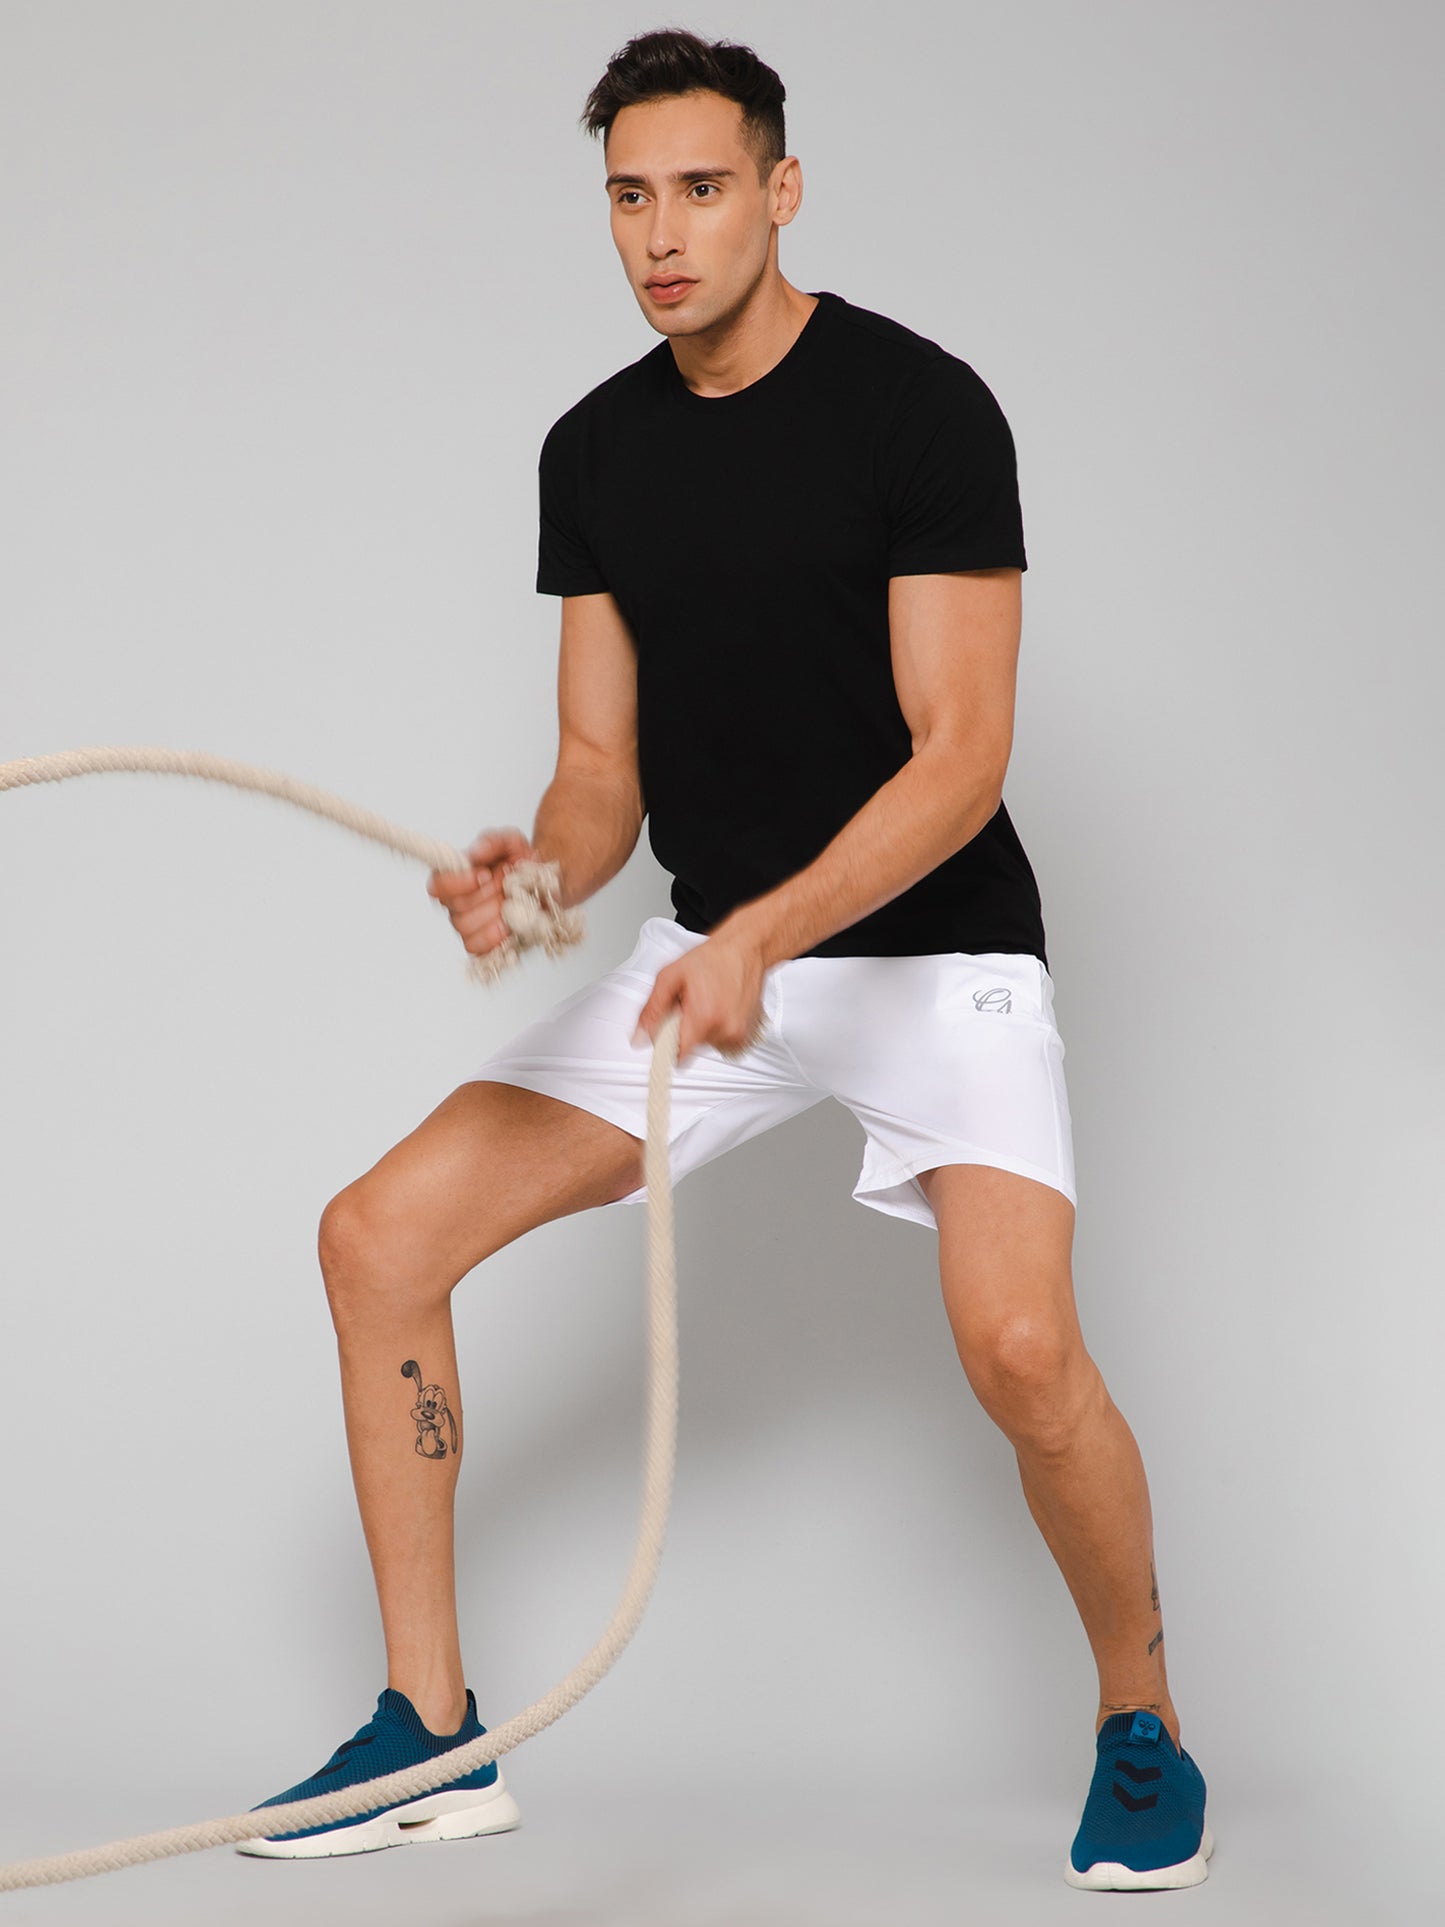 Solid White Shorts with Zip Pockets